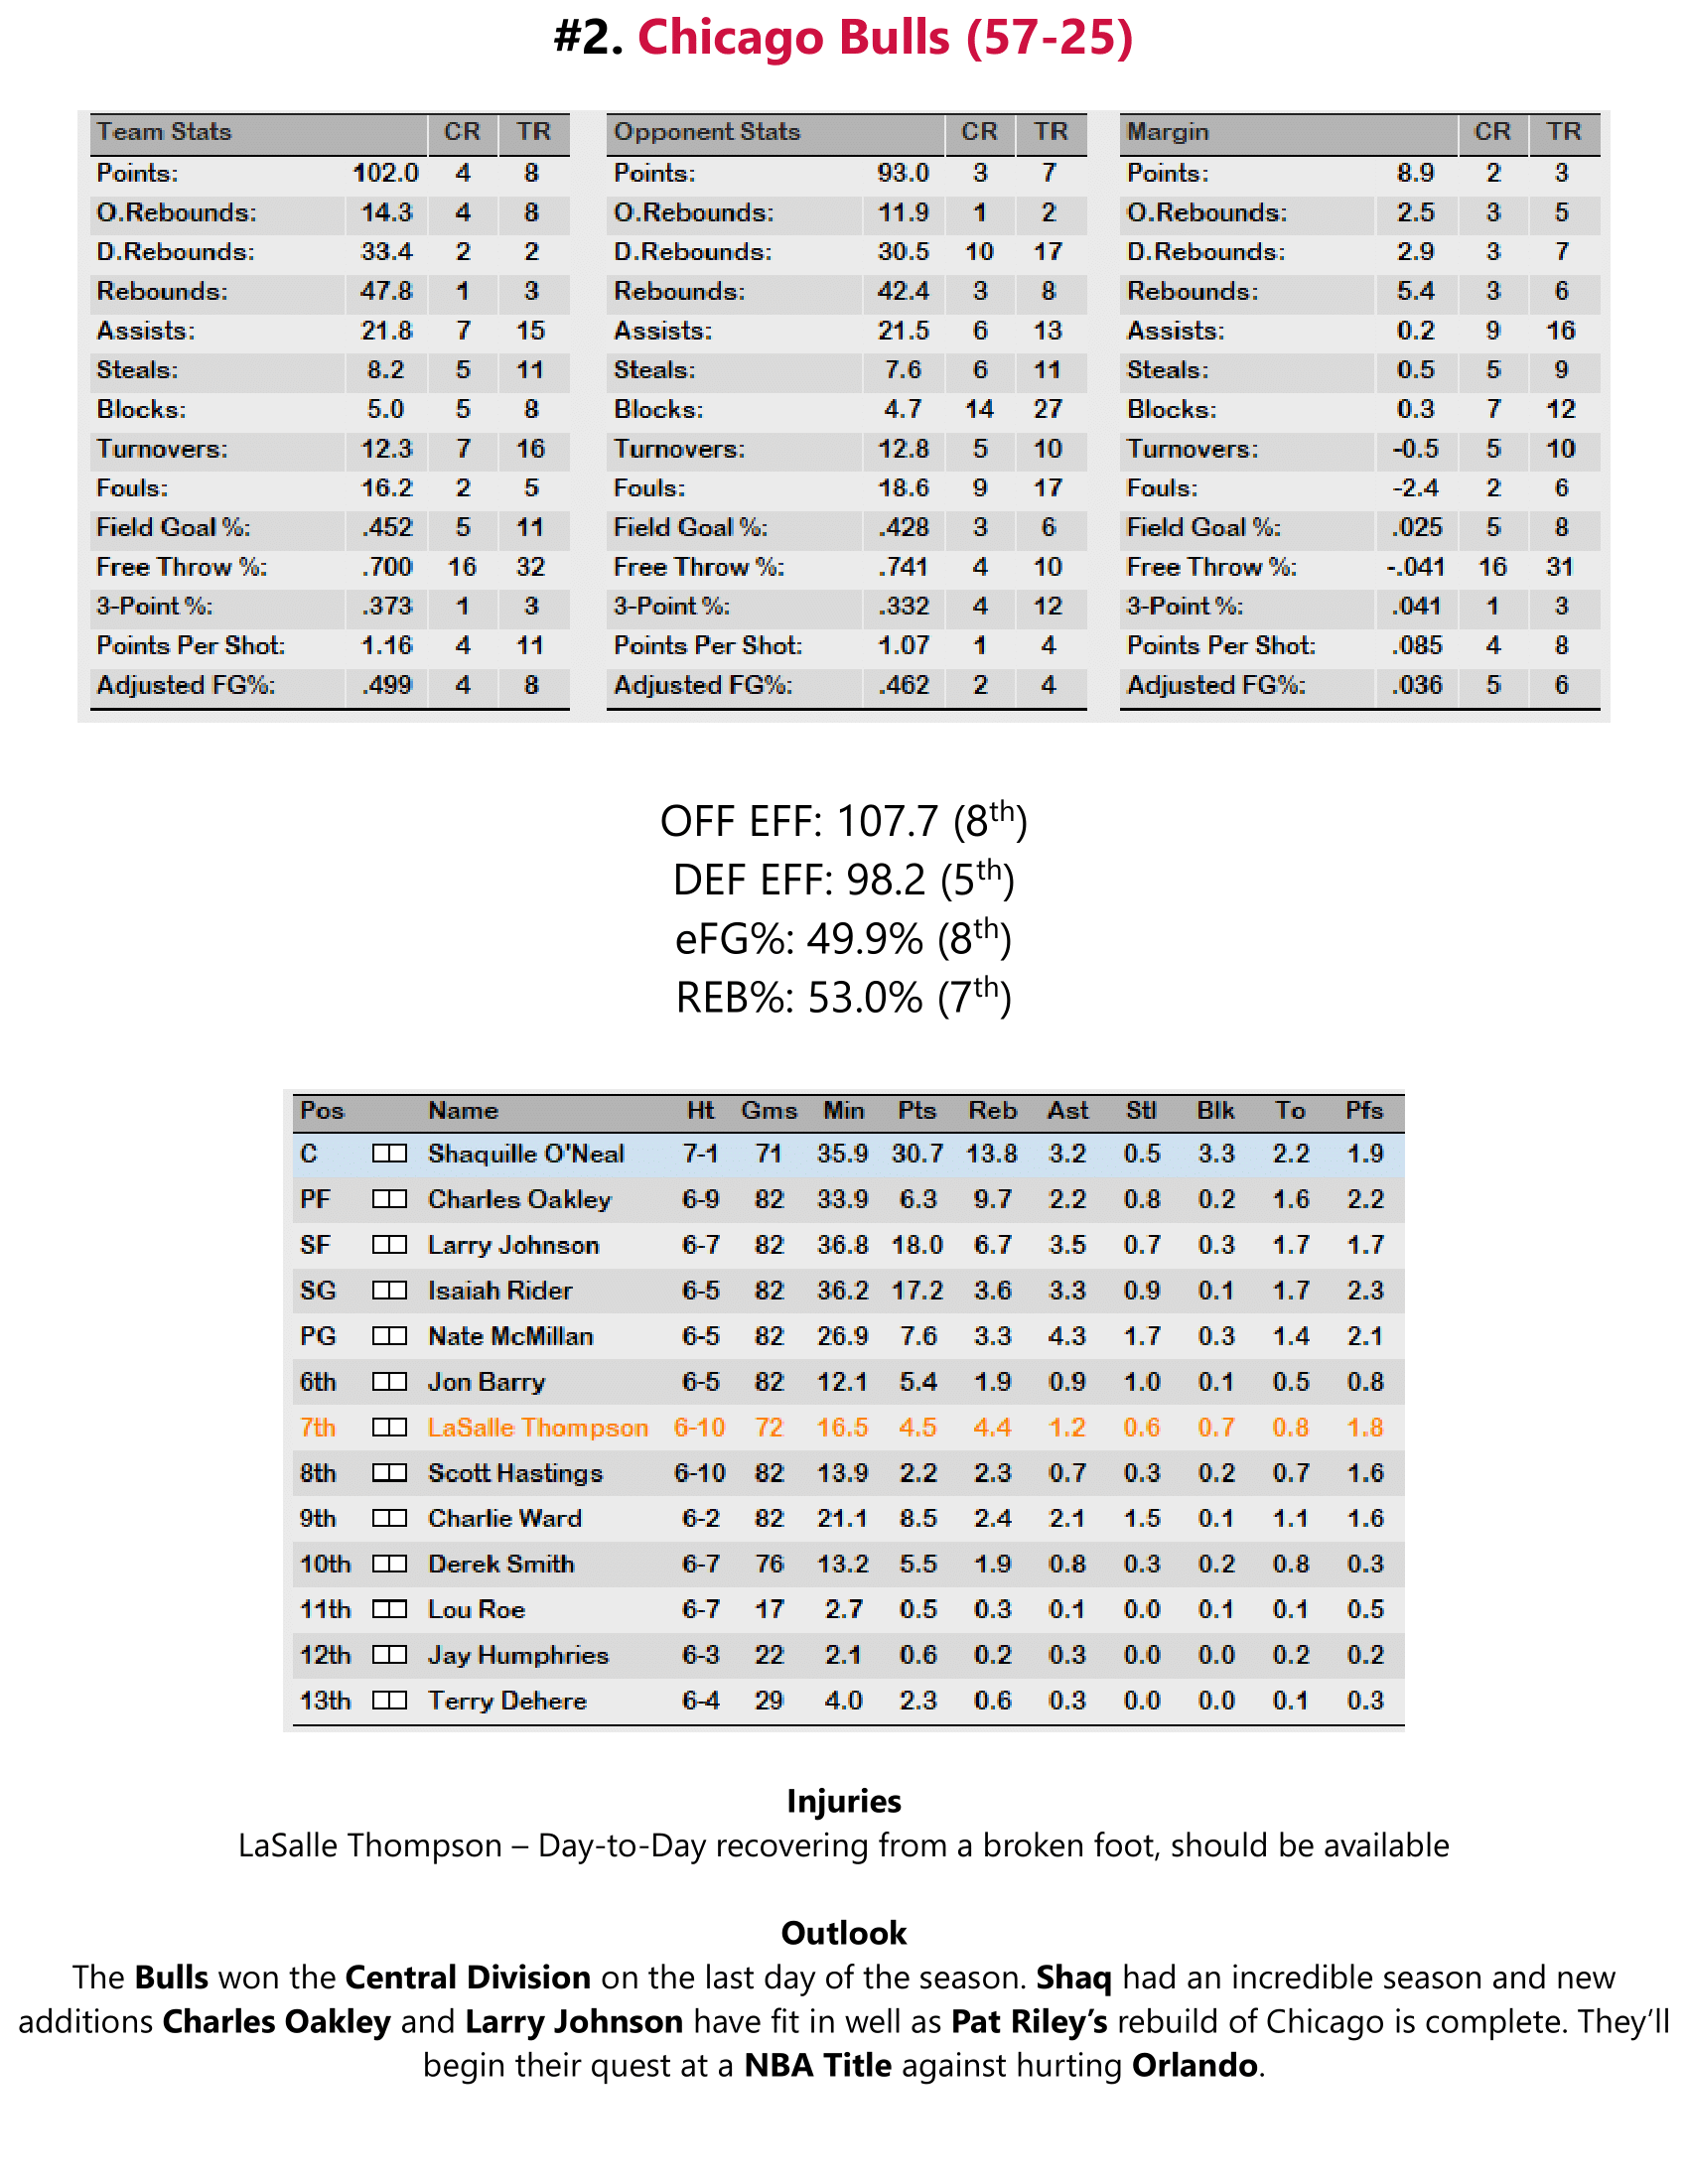 95-96-Part-3-Playoff-Preview-11.png